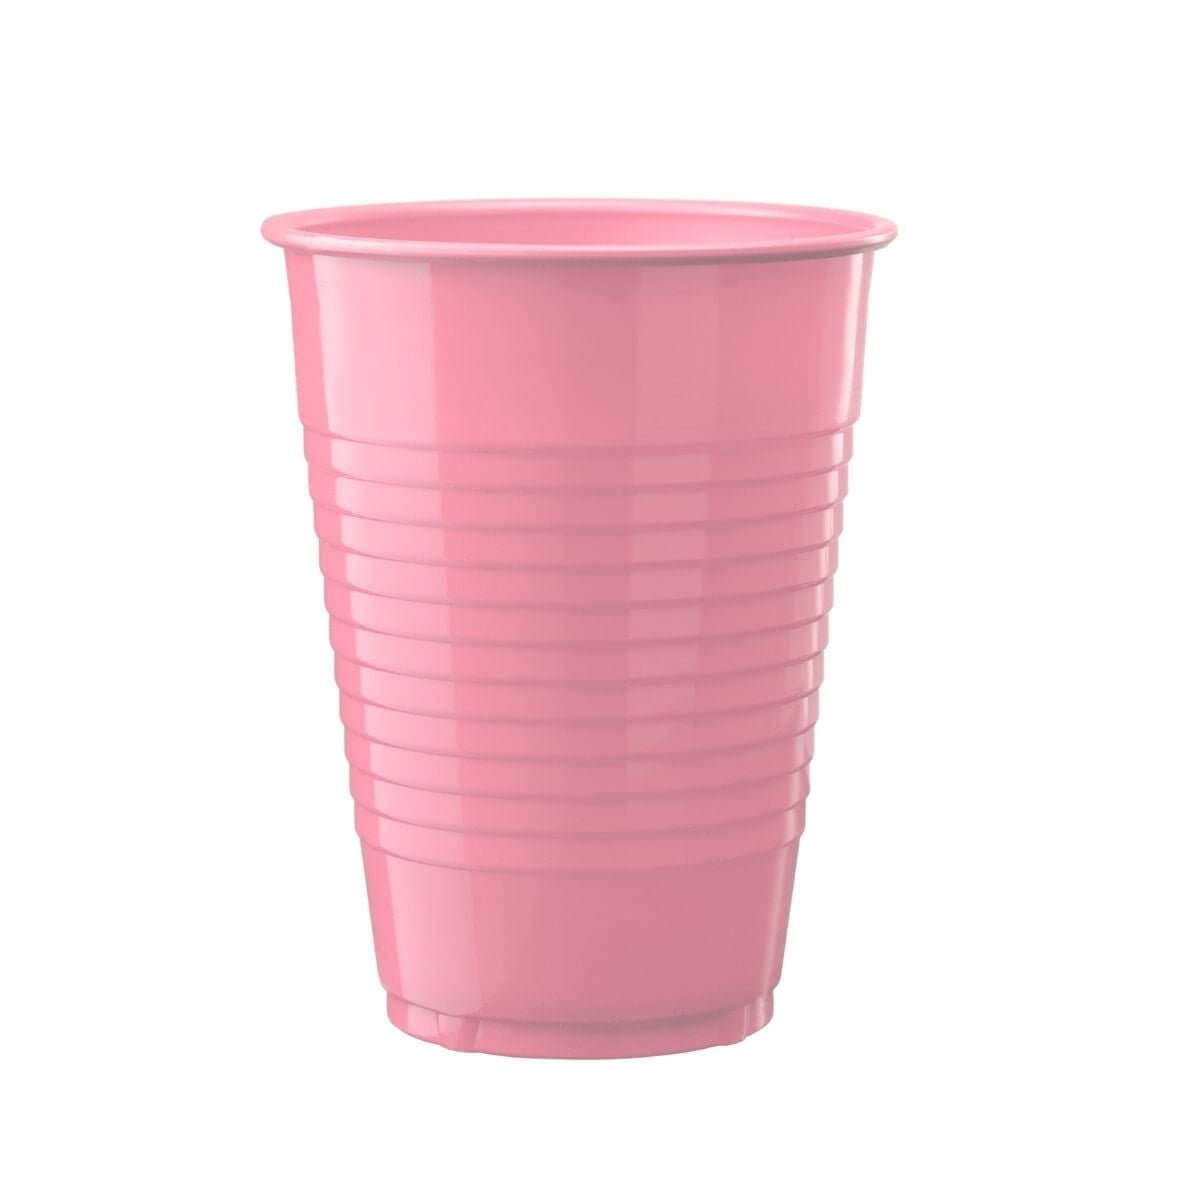 12 Oz. | Pink Plastic Cups | 600 Count - Yom Tov Settings